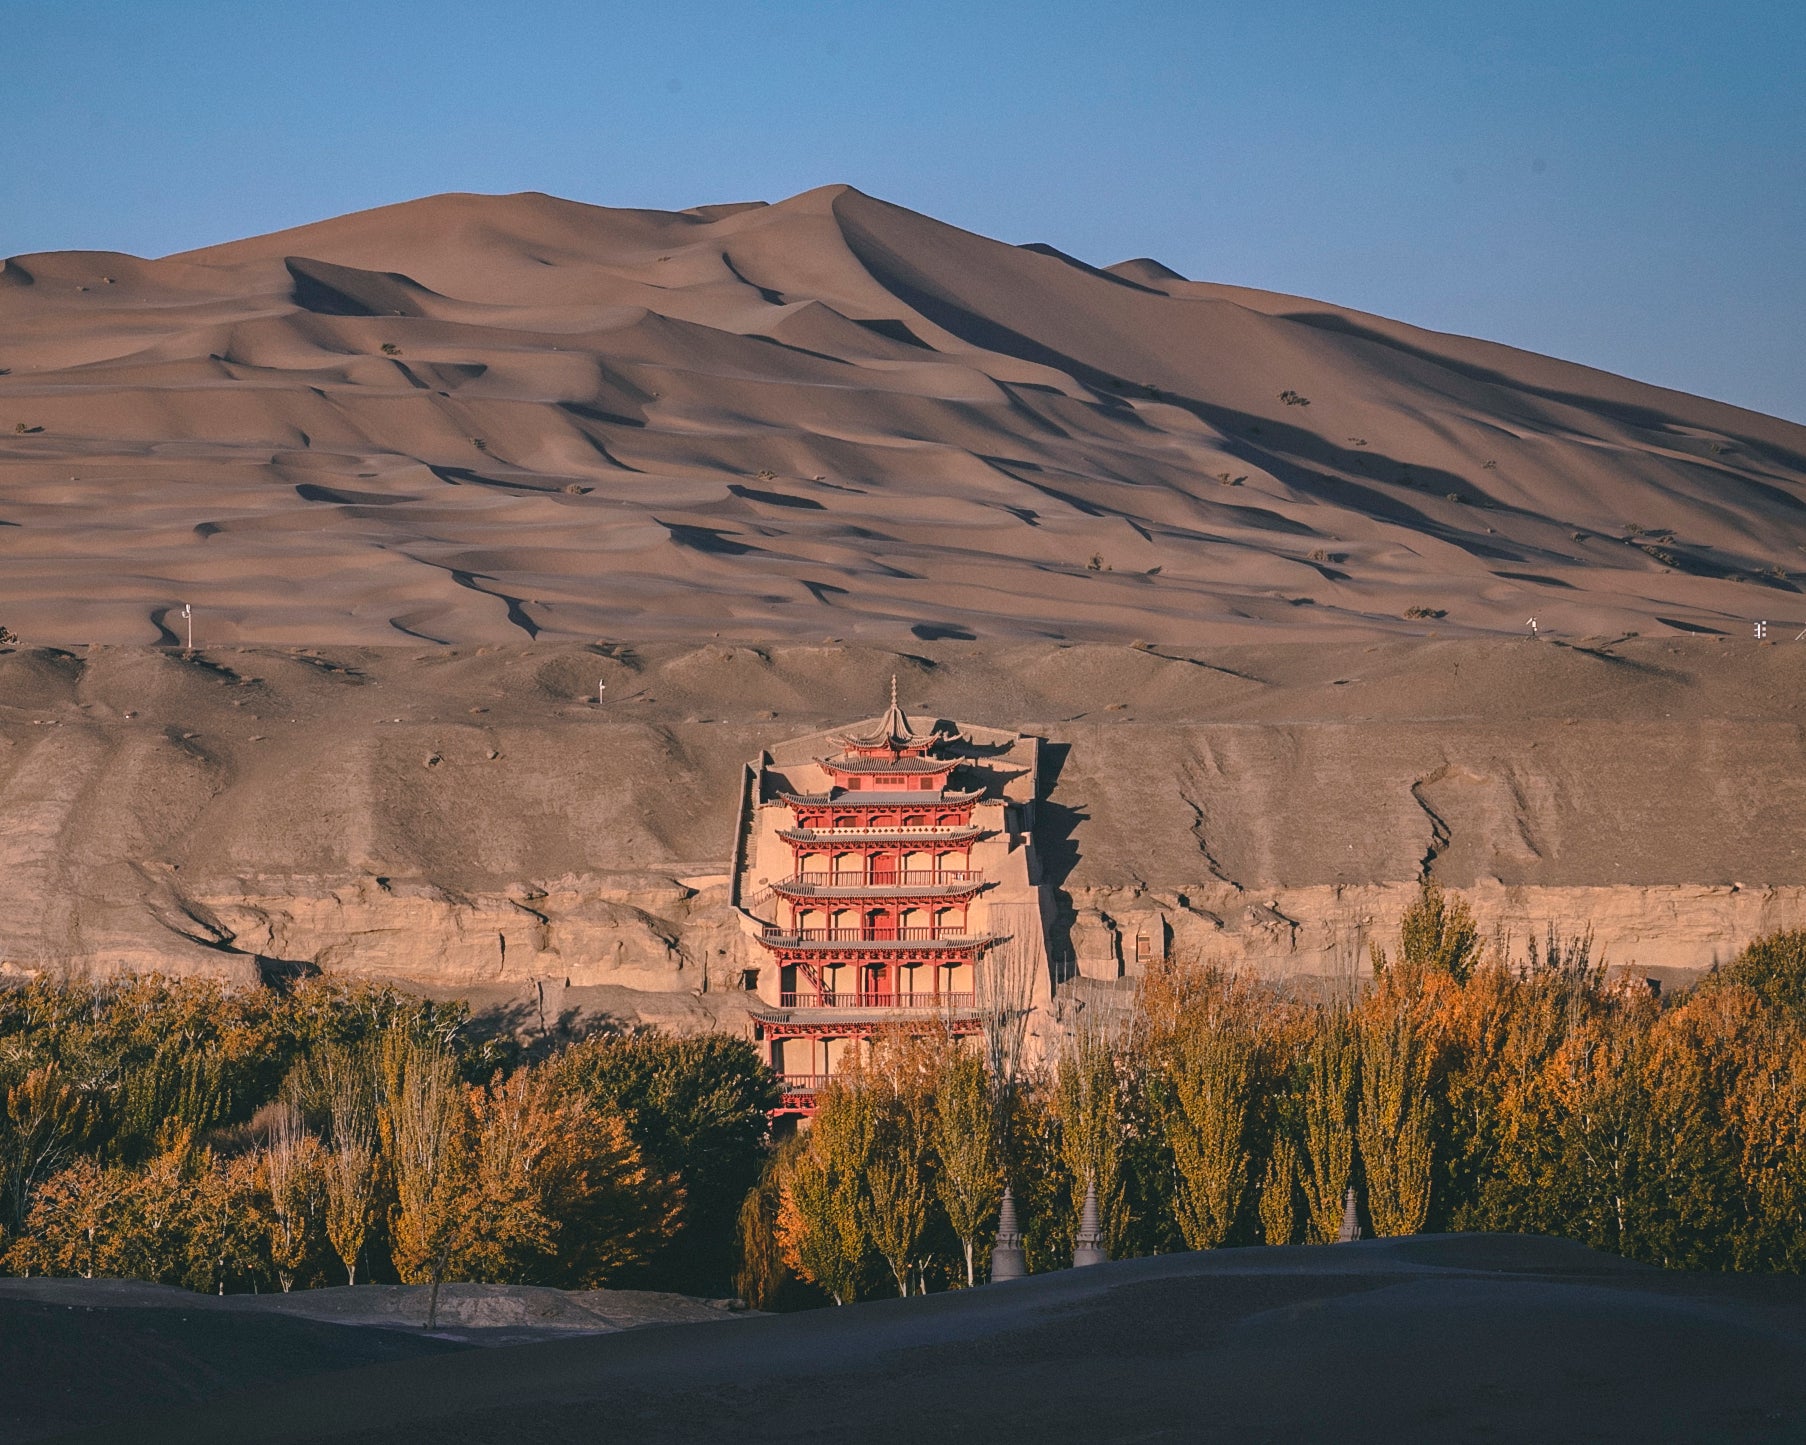 Mogao Caves in Northwest China have been an important site for Frances Wood